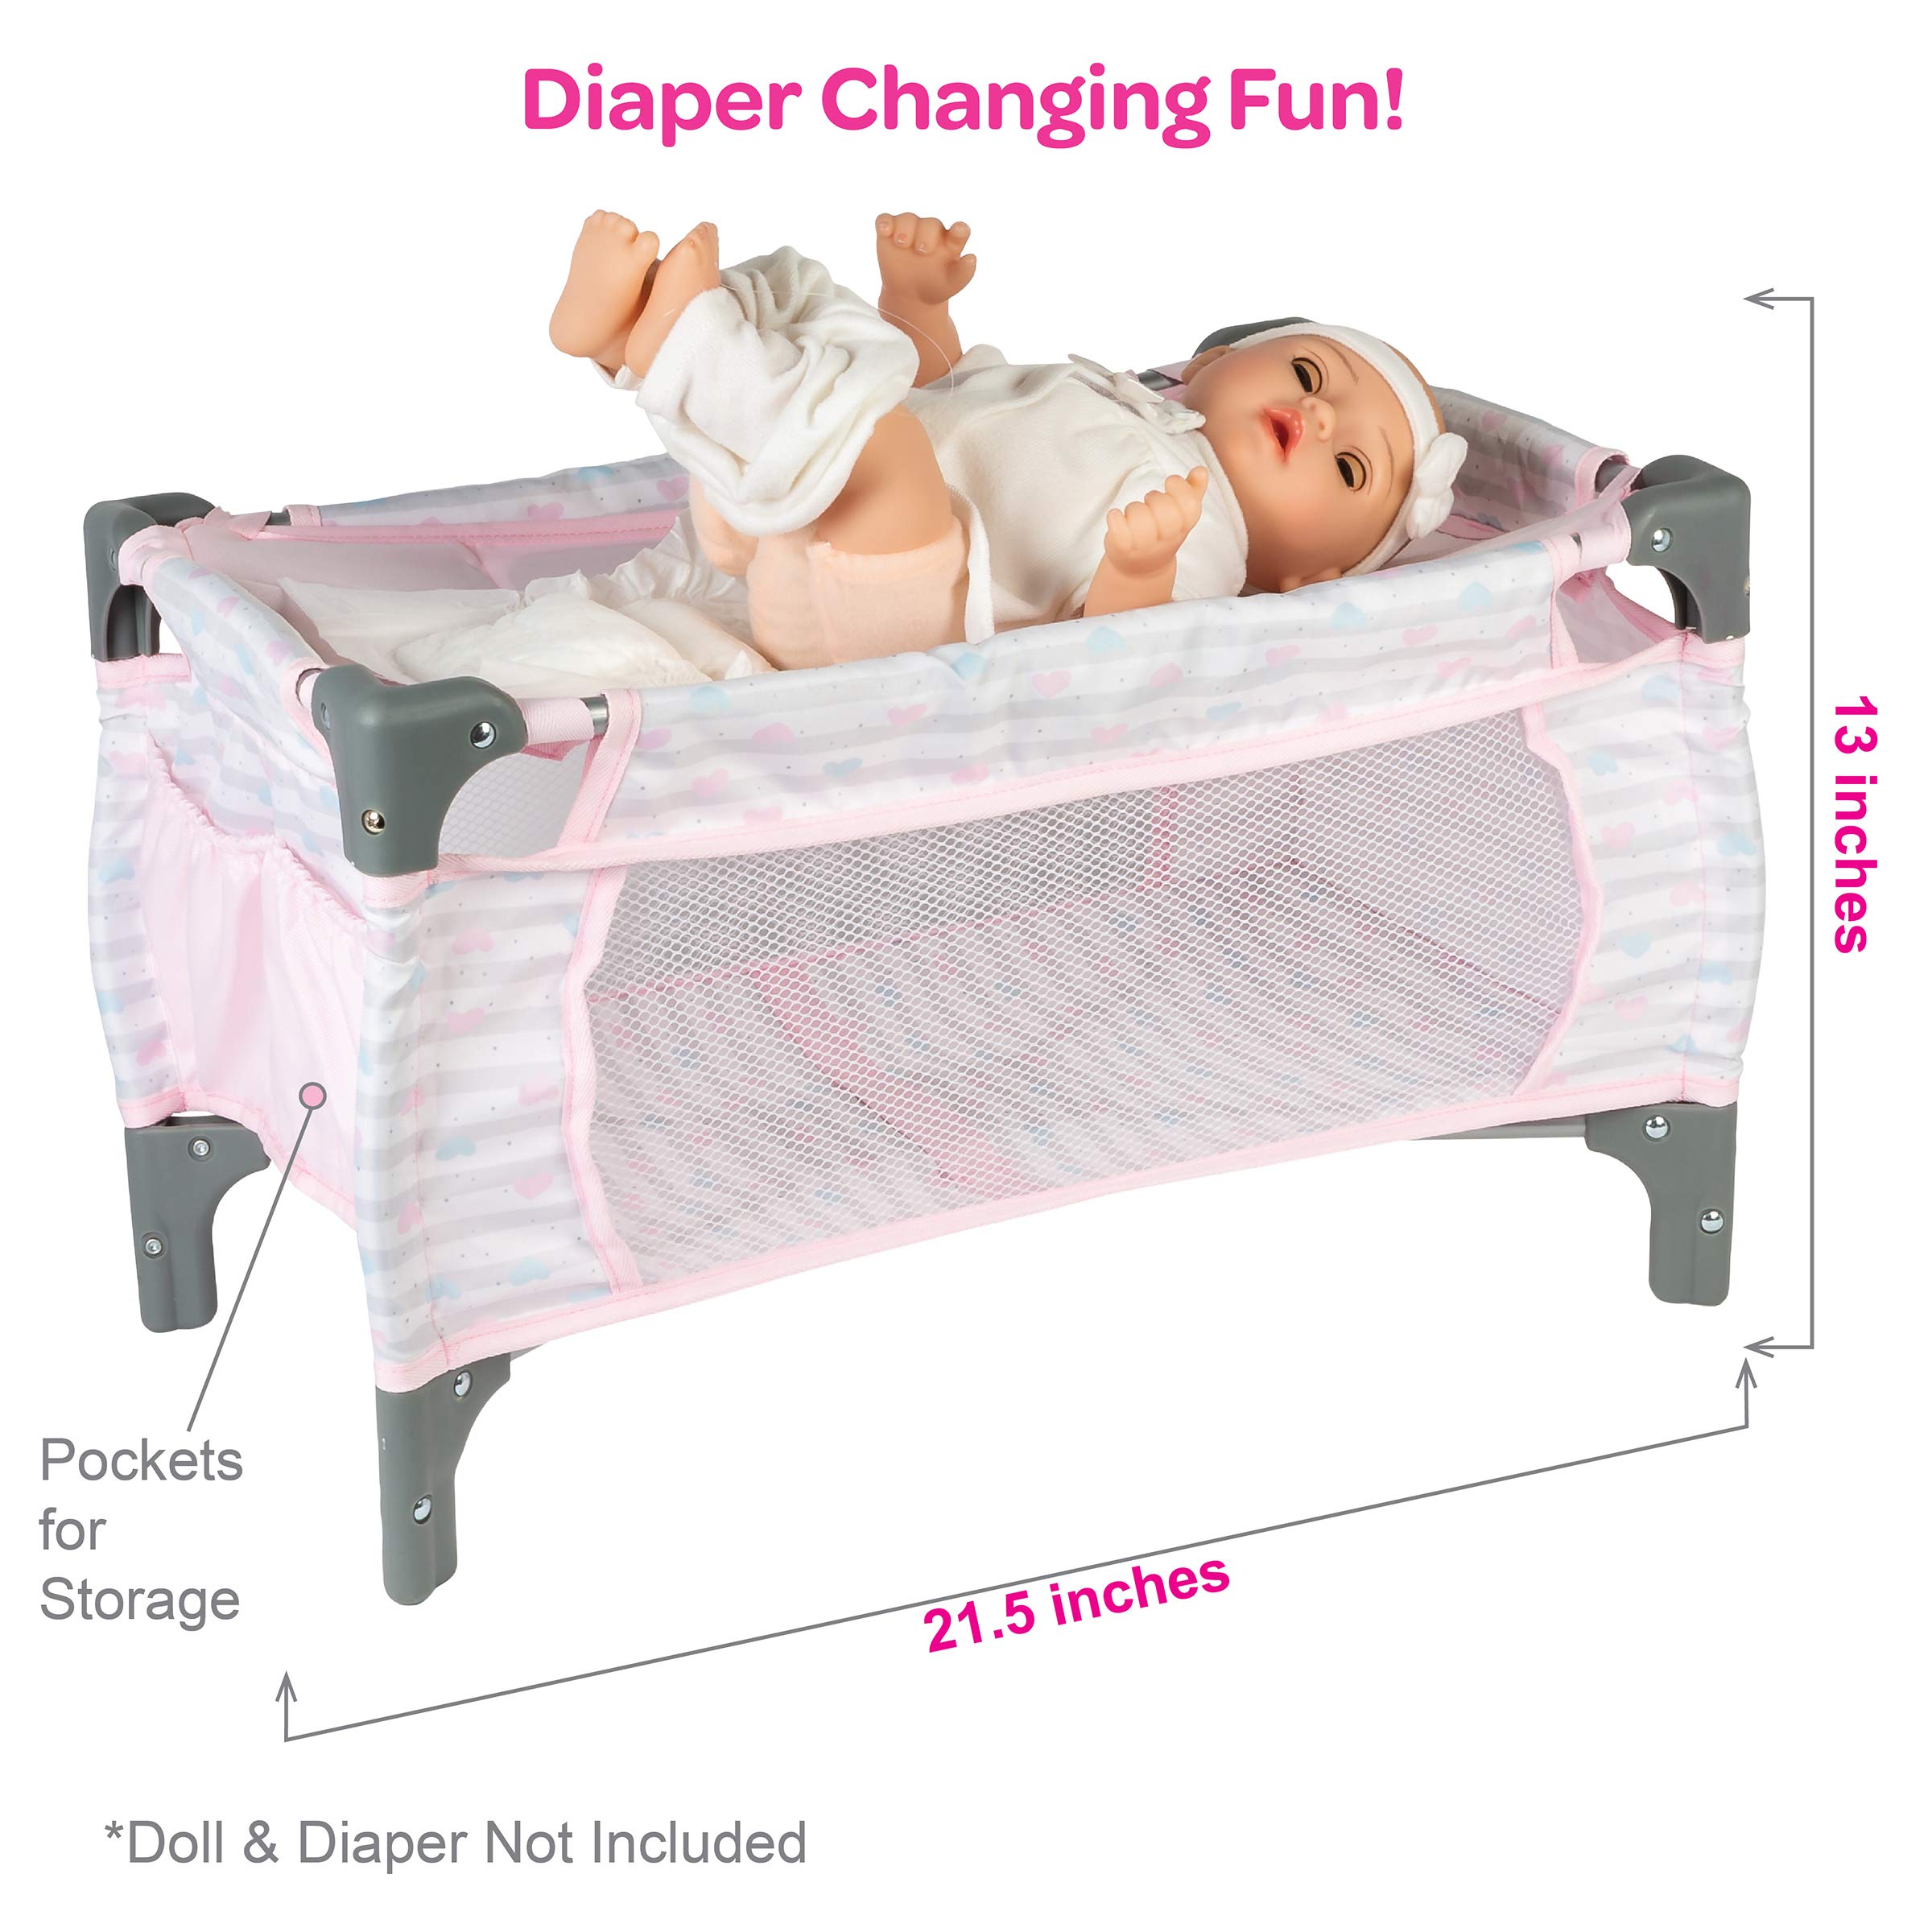 Adora Baby Doll Crib Pink Deluxe Pack N Play 7-Piece Set Fits Dolls up to 20 inches, Bed/Playpen, Changing Table, 3 Clouds and Storage Bag